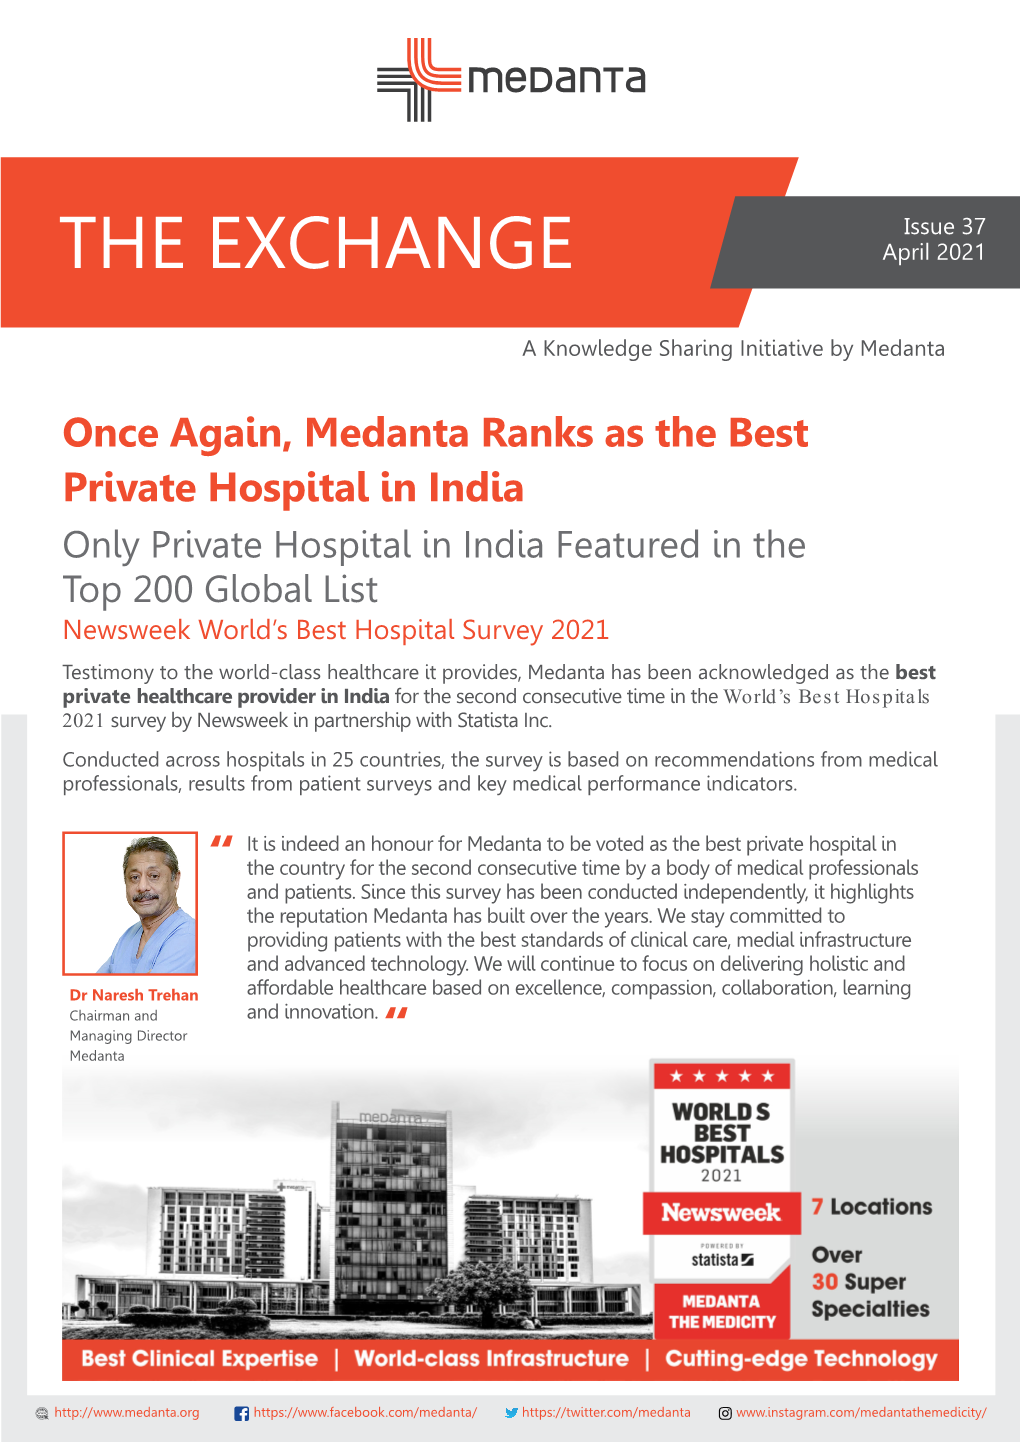 Once Again, Medanta Ranks As the Best Private Hospital in India